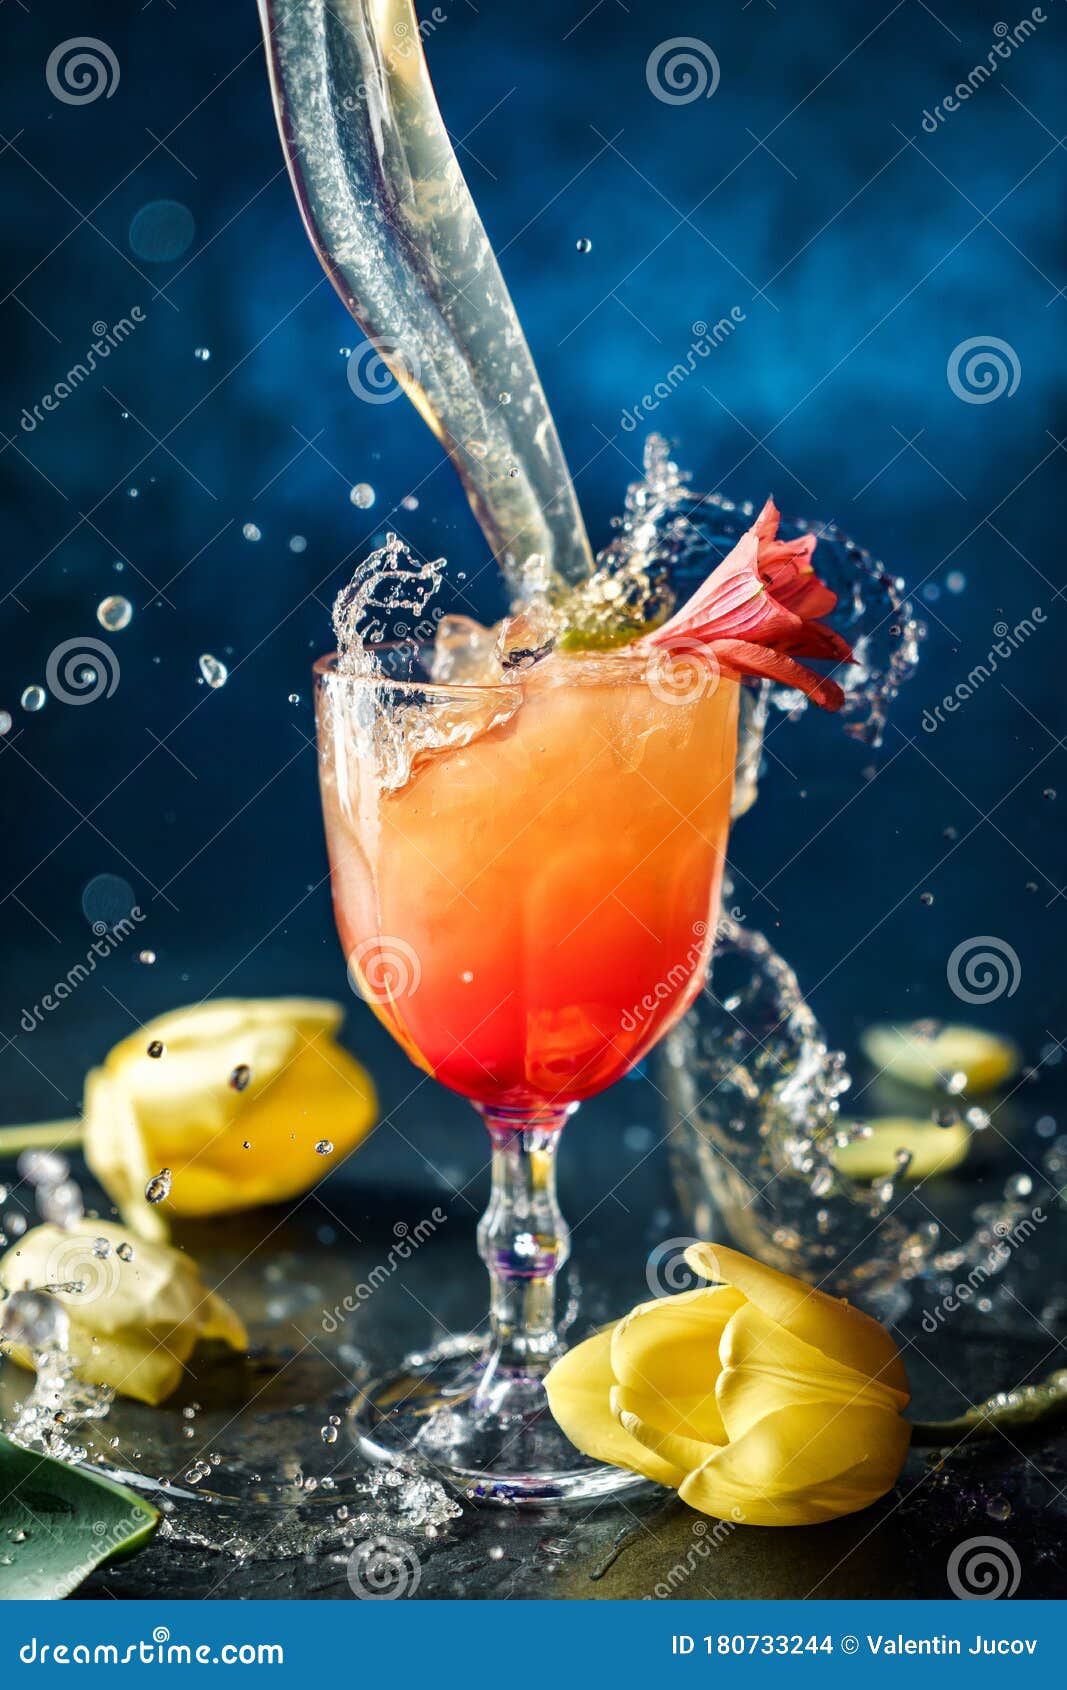 Fresh Tropical Cocktail with Ice and Flowers in Wineglass on Dark Blue Background photo image